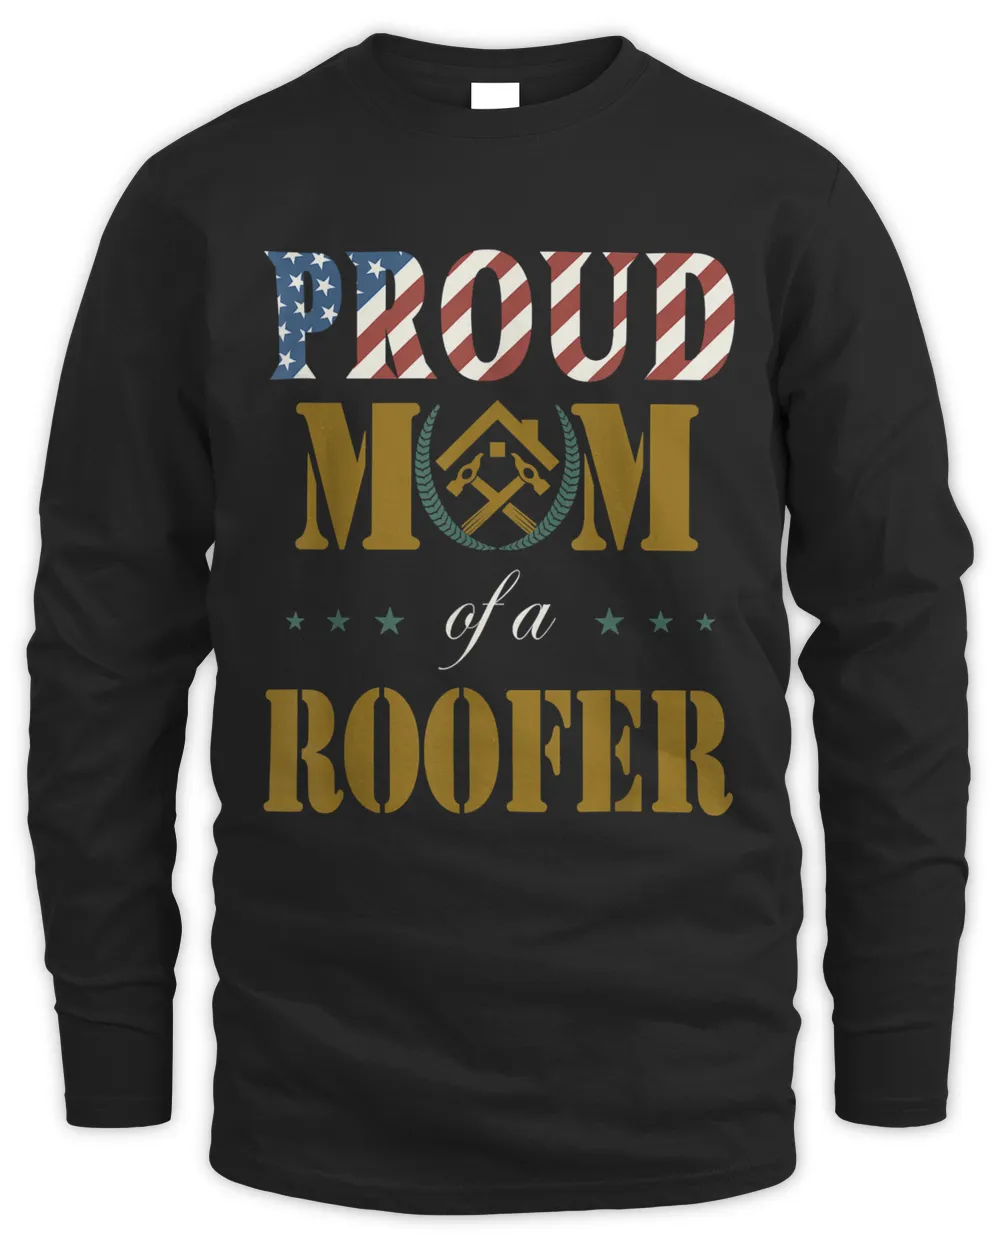 Vintage Flag American Proud Mom of a Roofer lovers gifts T-Shirt